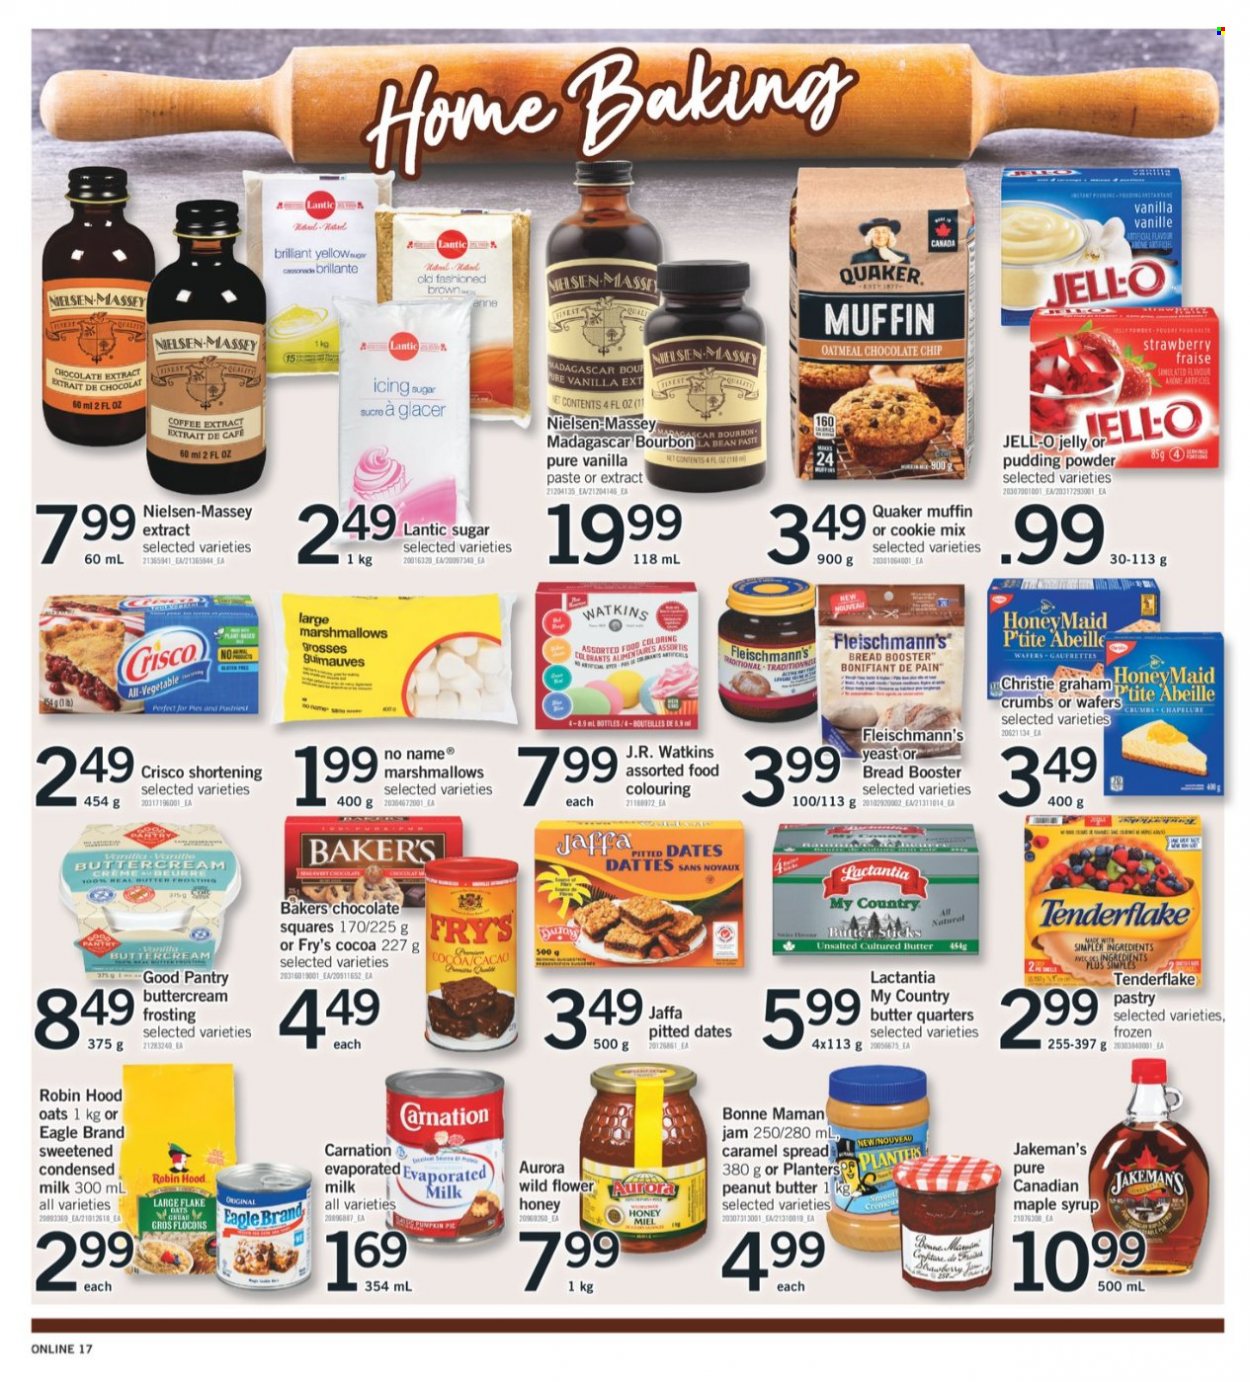 thumbnail - Fortinos Flyer - September 23, 2021 - September 29, 2021 - Sales products - No Name, Quaker, pudding, evaporated milk, condensed milk, yeast, marshmallows, wafers, chocolate chips, jelly, cocoa, Crisco, frosting, shortening, sugar, oatmeal, oats, Jell-O, caramel, maple syrup, honey, fruit jam, peanut butter, syrup, dried fruit, dried dates, Planters, coffee, bourbon, Bakers. Page 9.